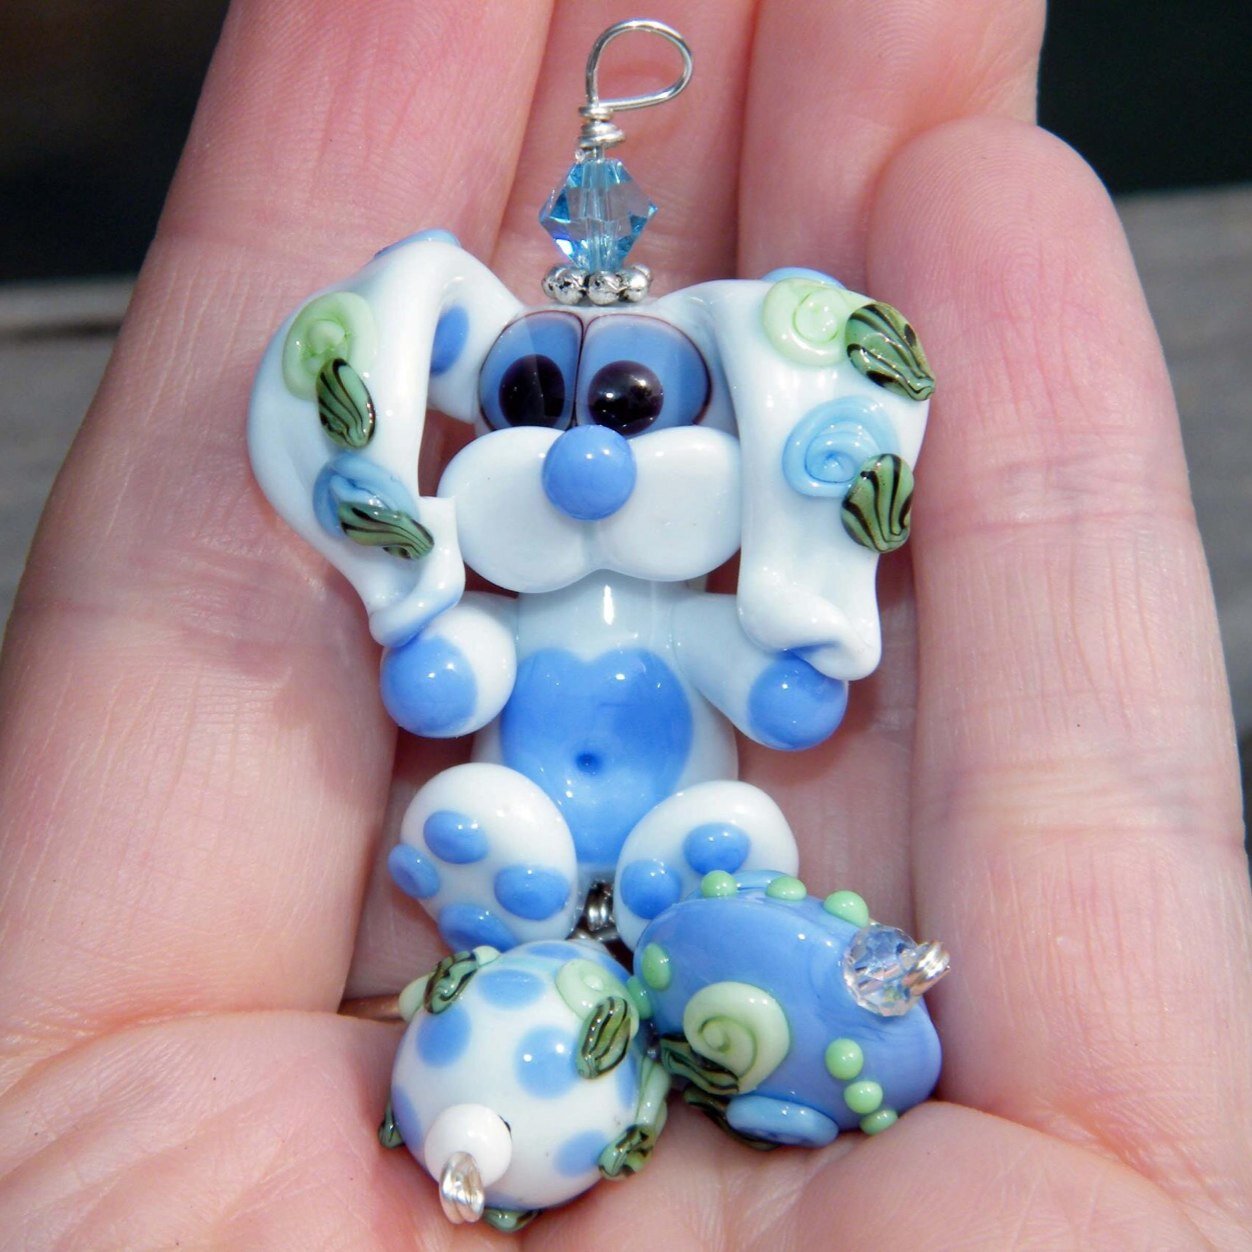 I make lampwork critter beads, and memorial beads. I have been lampworking for over 11 years now. Making beads is a way for me to relax and unwind.